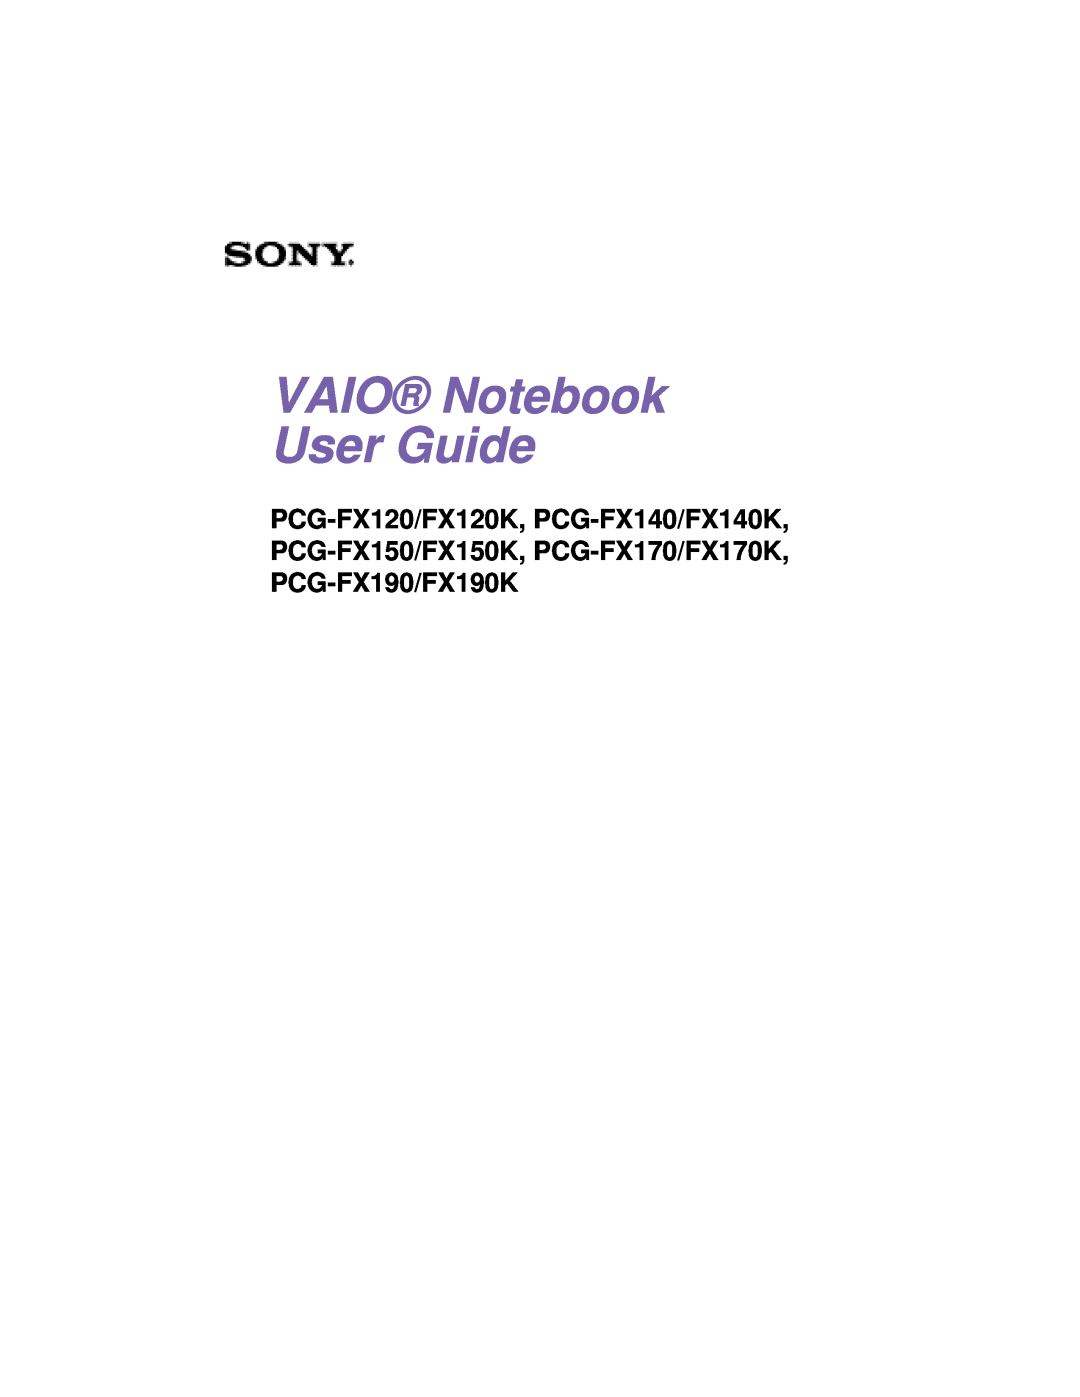 Sony specifications PCG-FX190 PCG-FX190K, Sony VAIO All-in-One Notebook, Plus, Specifications, Features, in Built 